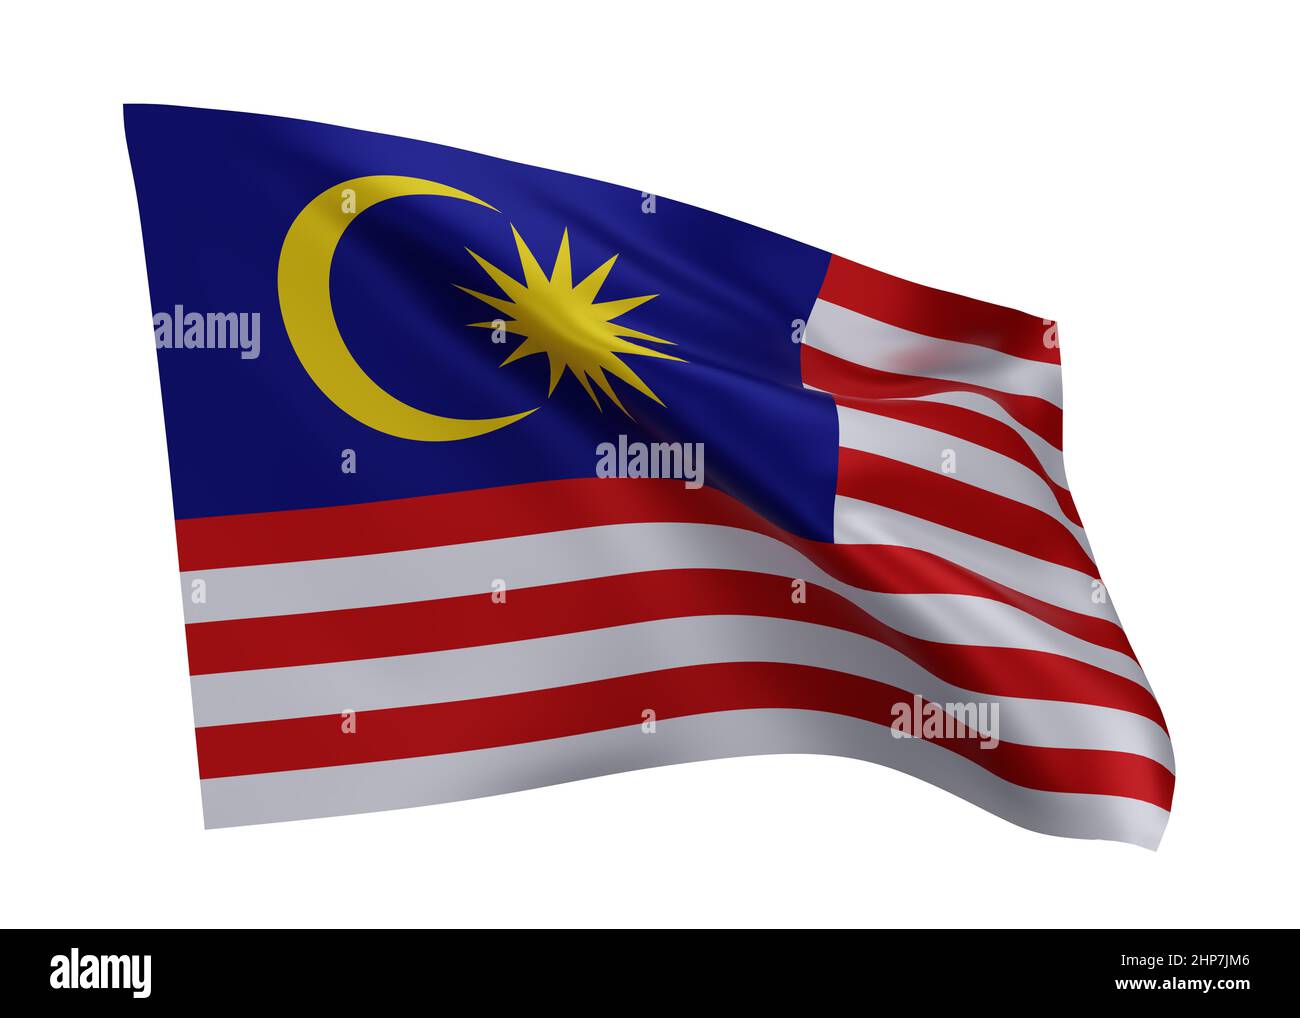 3d illustration flag of Malaysia. Malaysian high resolution flag isolated against white background. 3d rendering Stock Photo